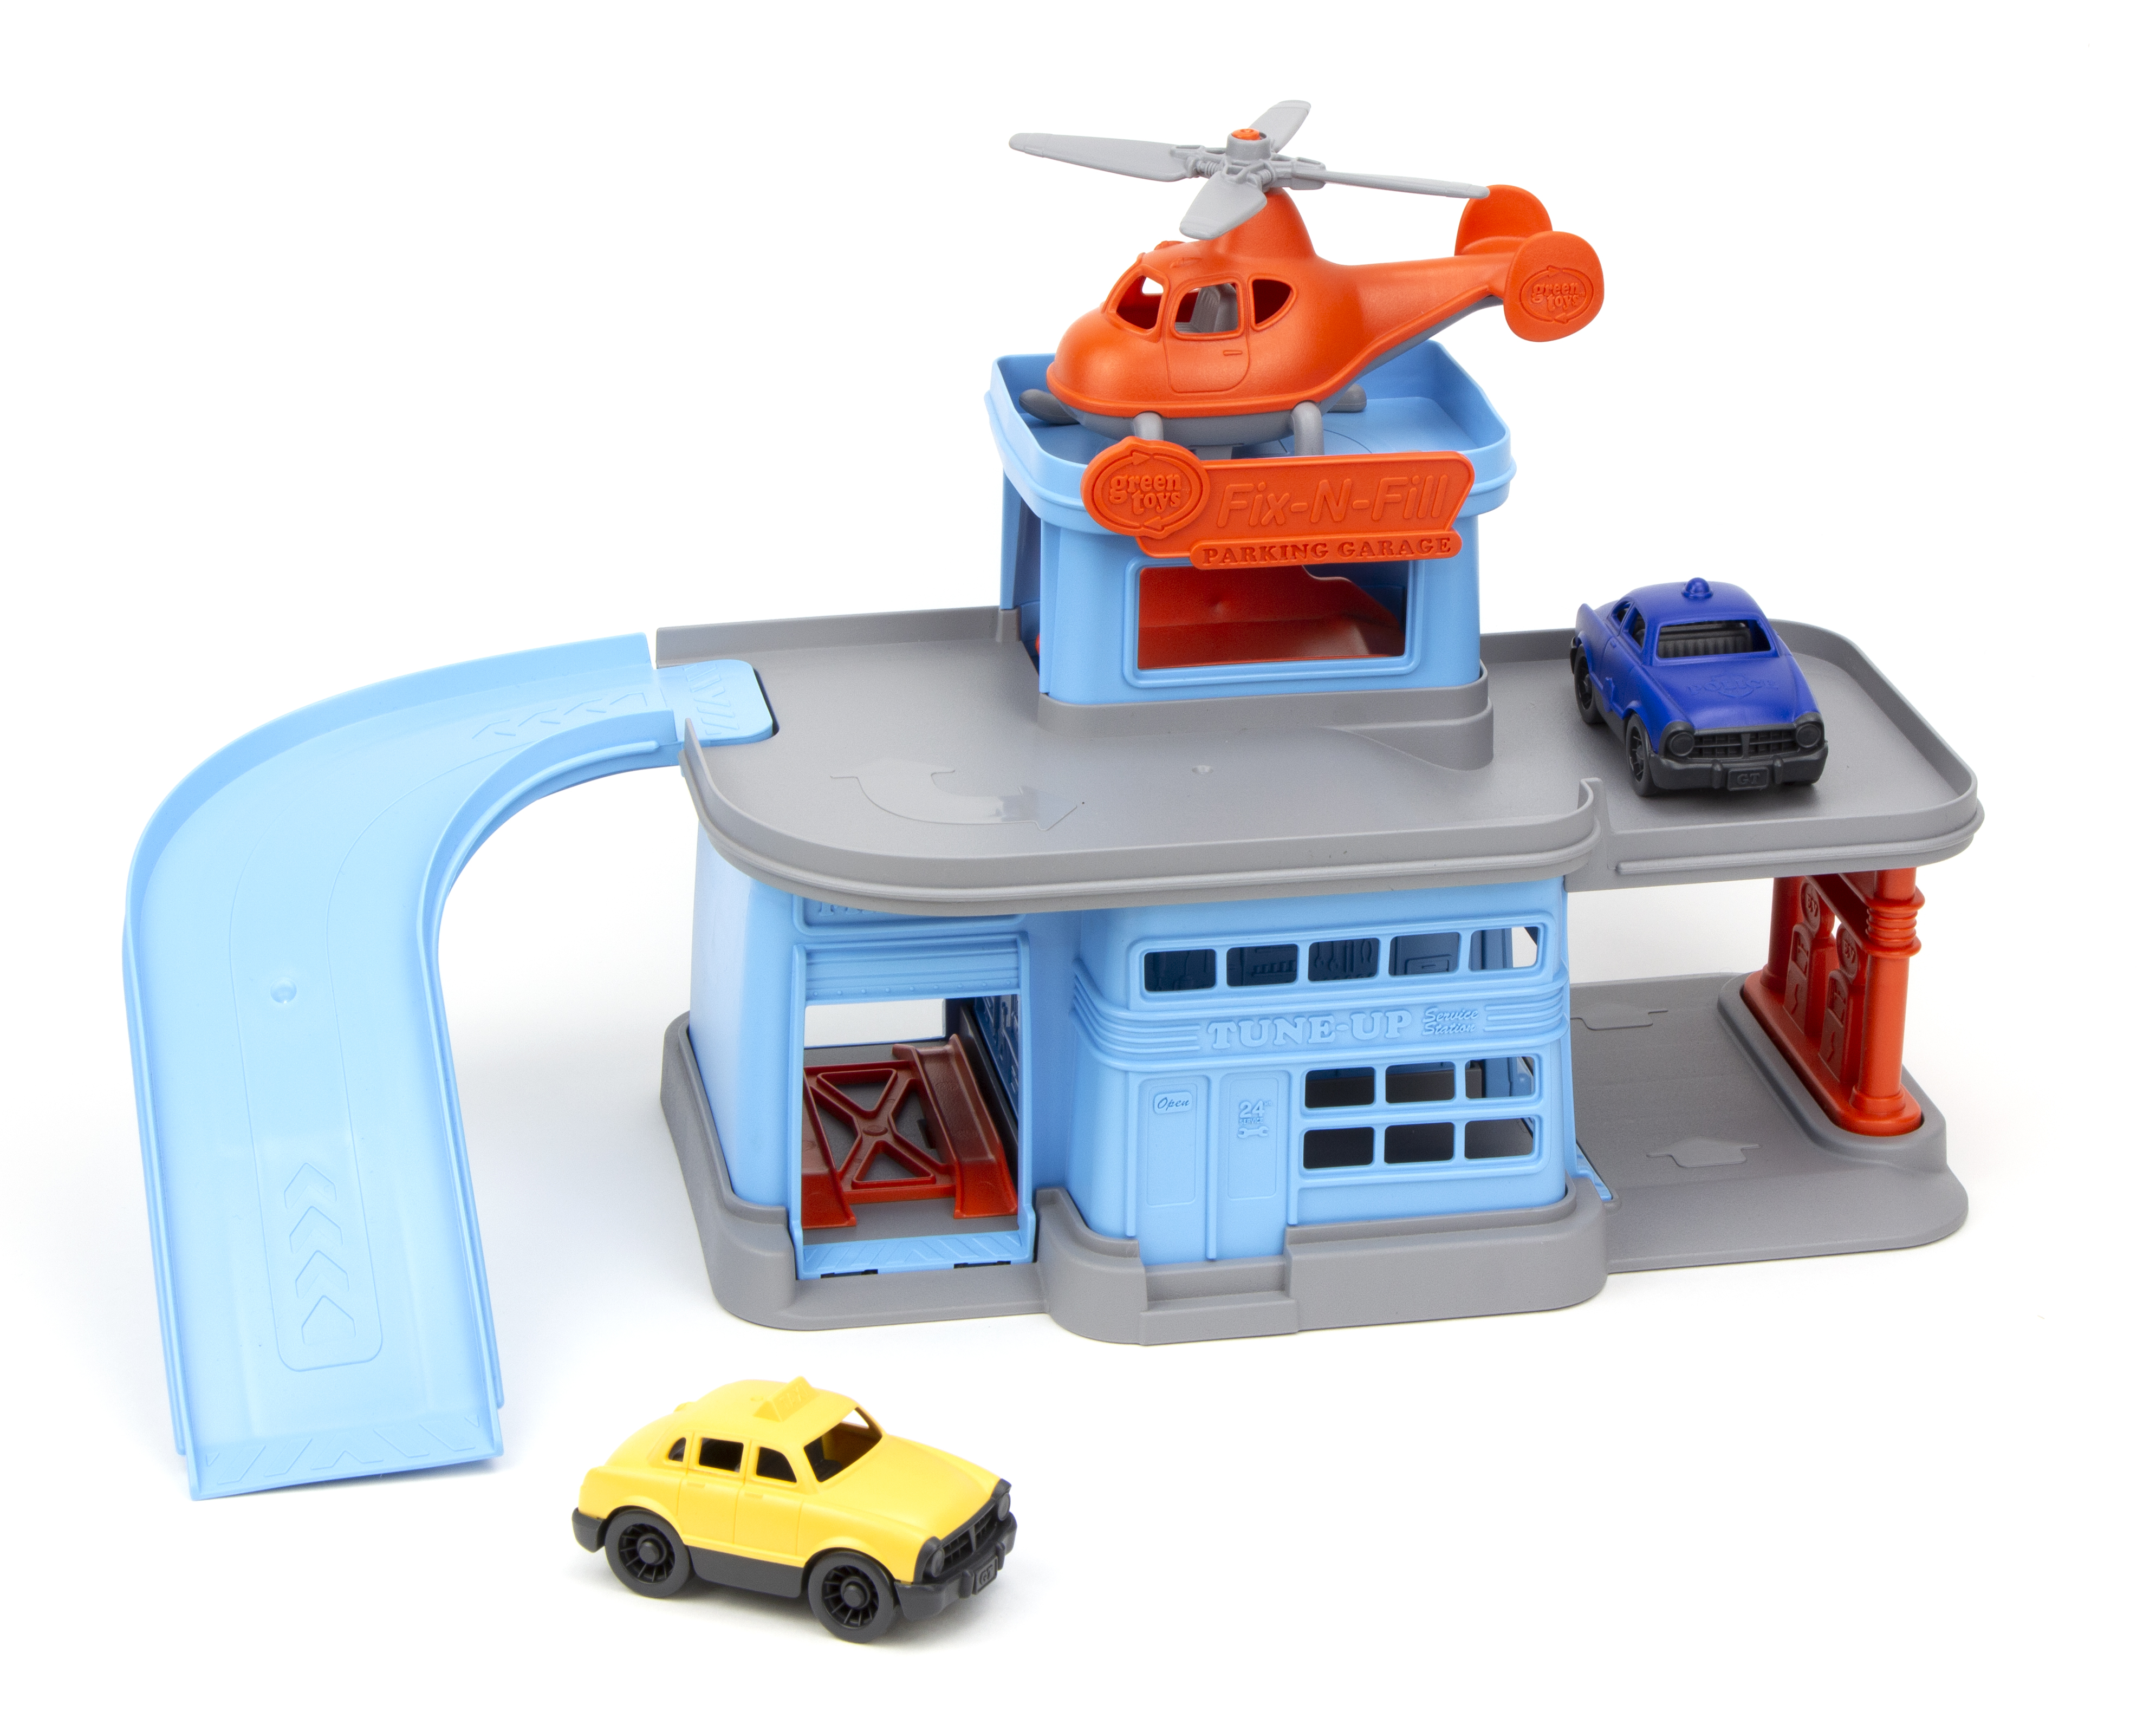 Green Toys Parking Garage, Unisex Vehicle Playset for Children Ages 3 and up - image 4 of 8